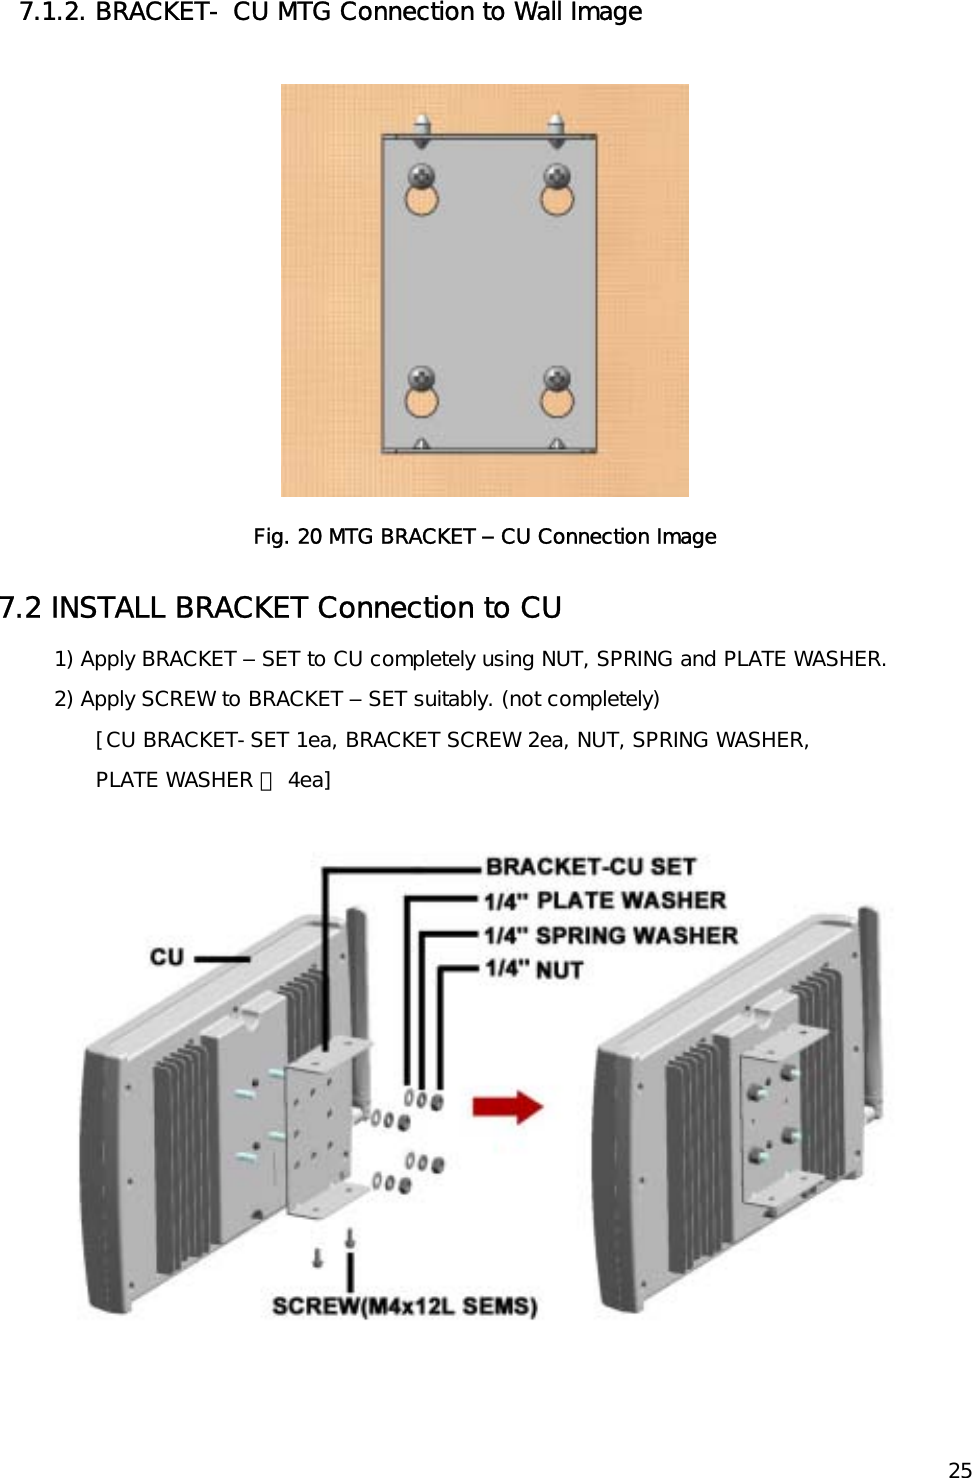   257.1.2. BRACKET- CU MTG Connection to Wall Image    Fig. 20 MTG BRACKET – CU Connection Image 7.2 INSTALL BRACKET Connection to CU  1) Apply BRACKET – SET to CU completely using NUT, SPRING and PLATE WASHER. 2) Apply SCREW to BRACKET – SET suitably. (not completely) [CU BRACKET-SET 1ea, BRACKET SCREW 2ea, NUT, SPRING WASHER,  PLATE WASHER 각 4ea] 